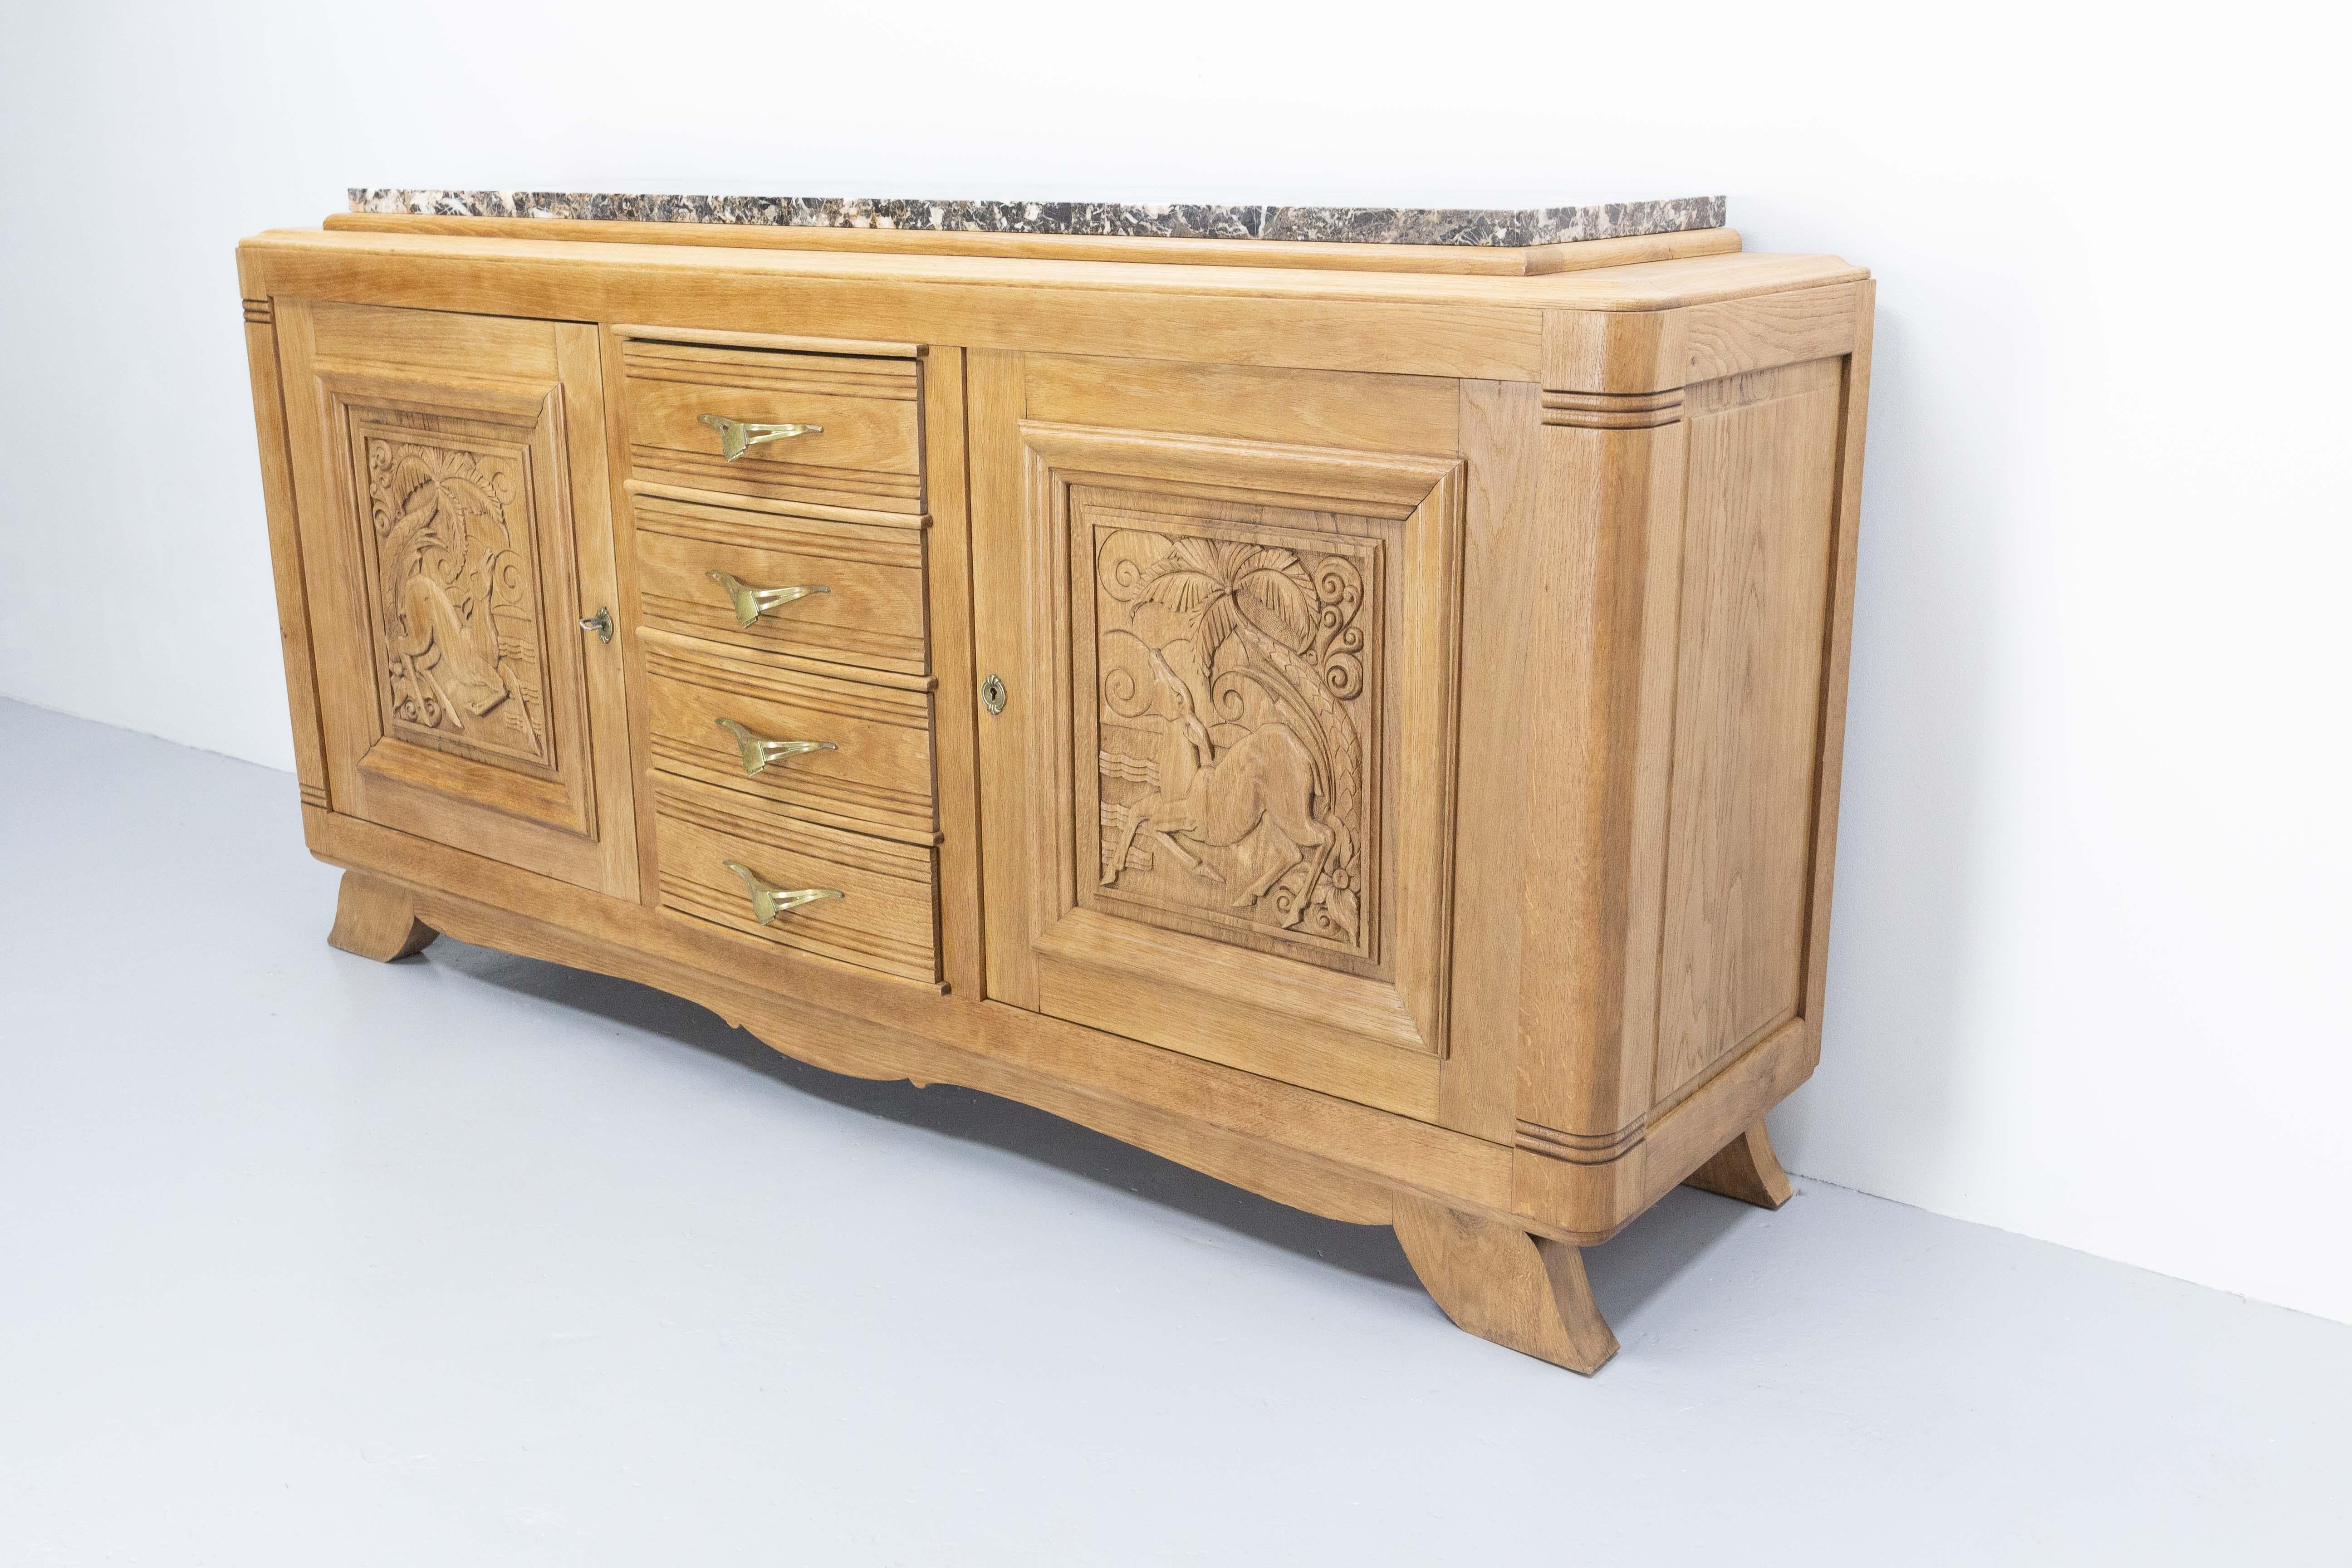 20th Century Massive Oak and Marble Top Antelopes Credenza Sideboard French Buffet, C. 1940 For Sale